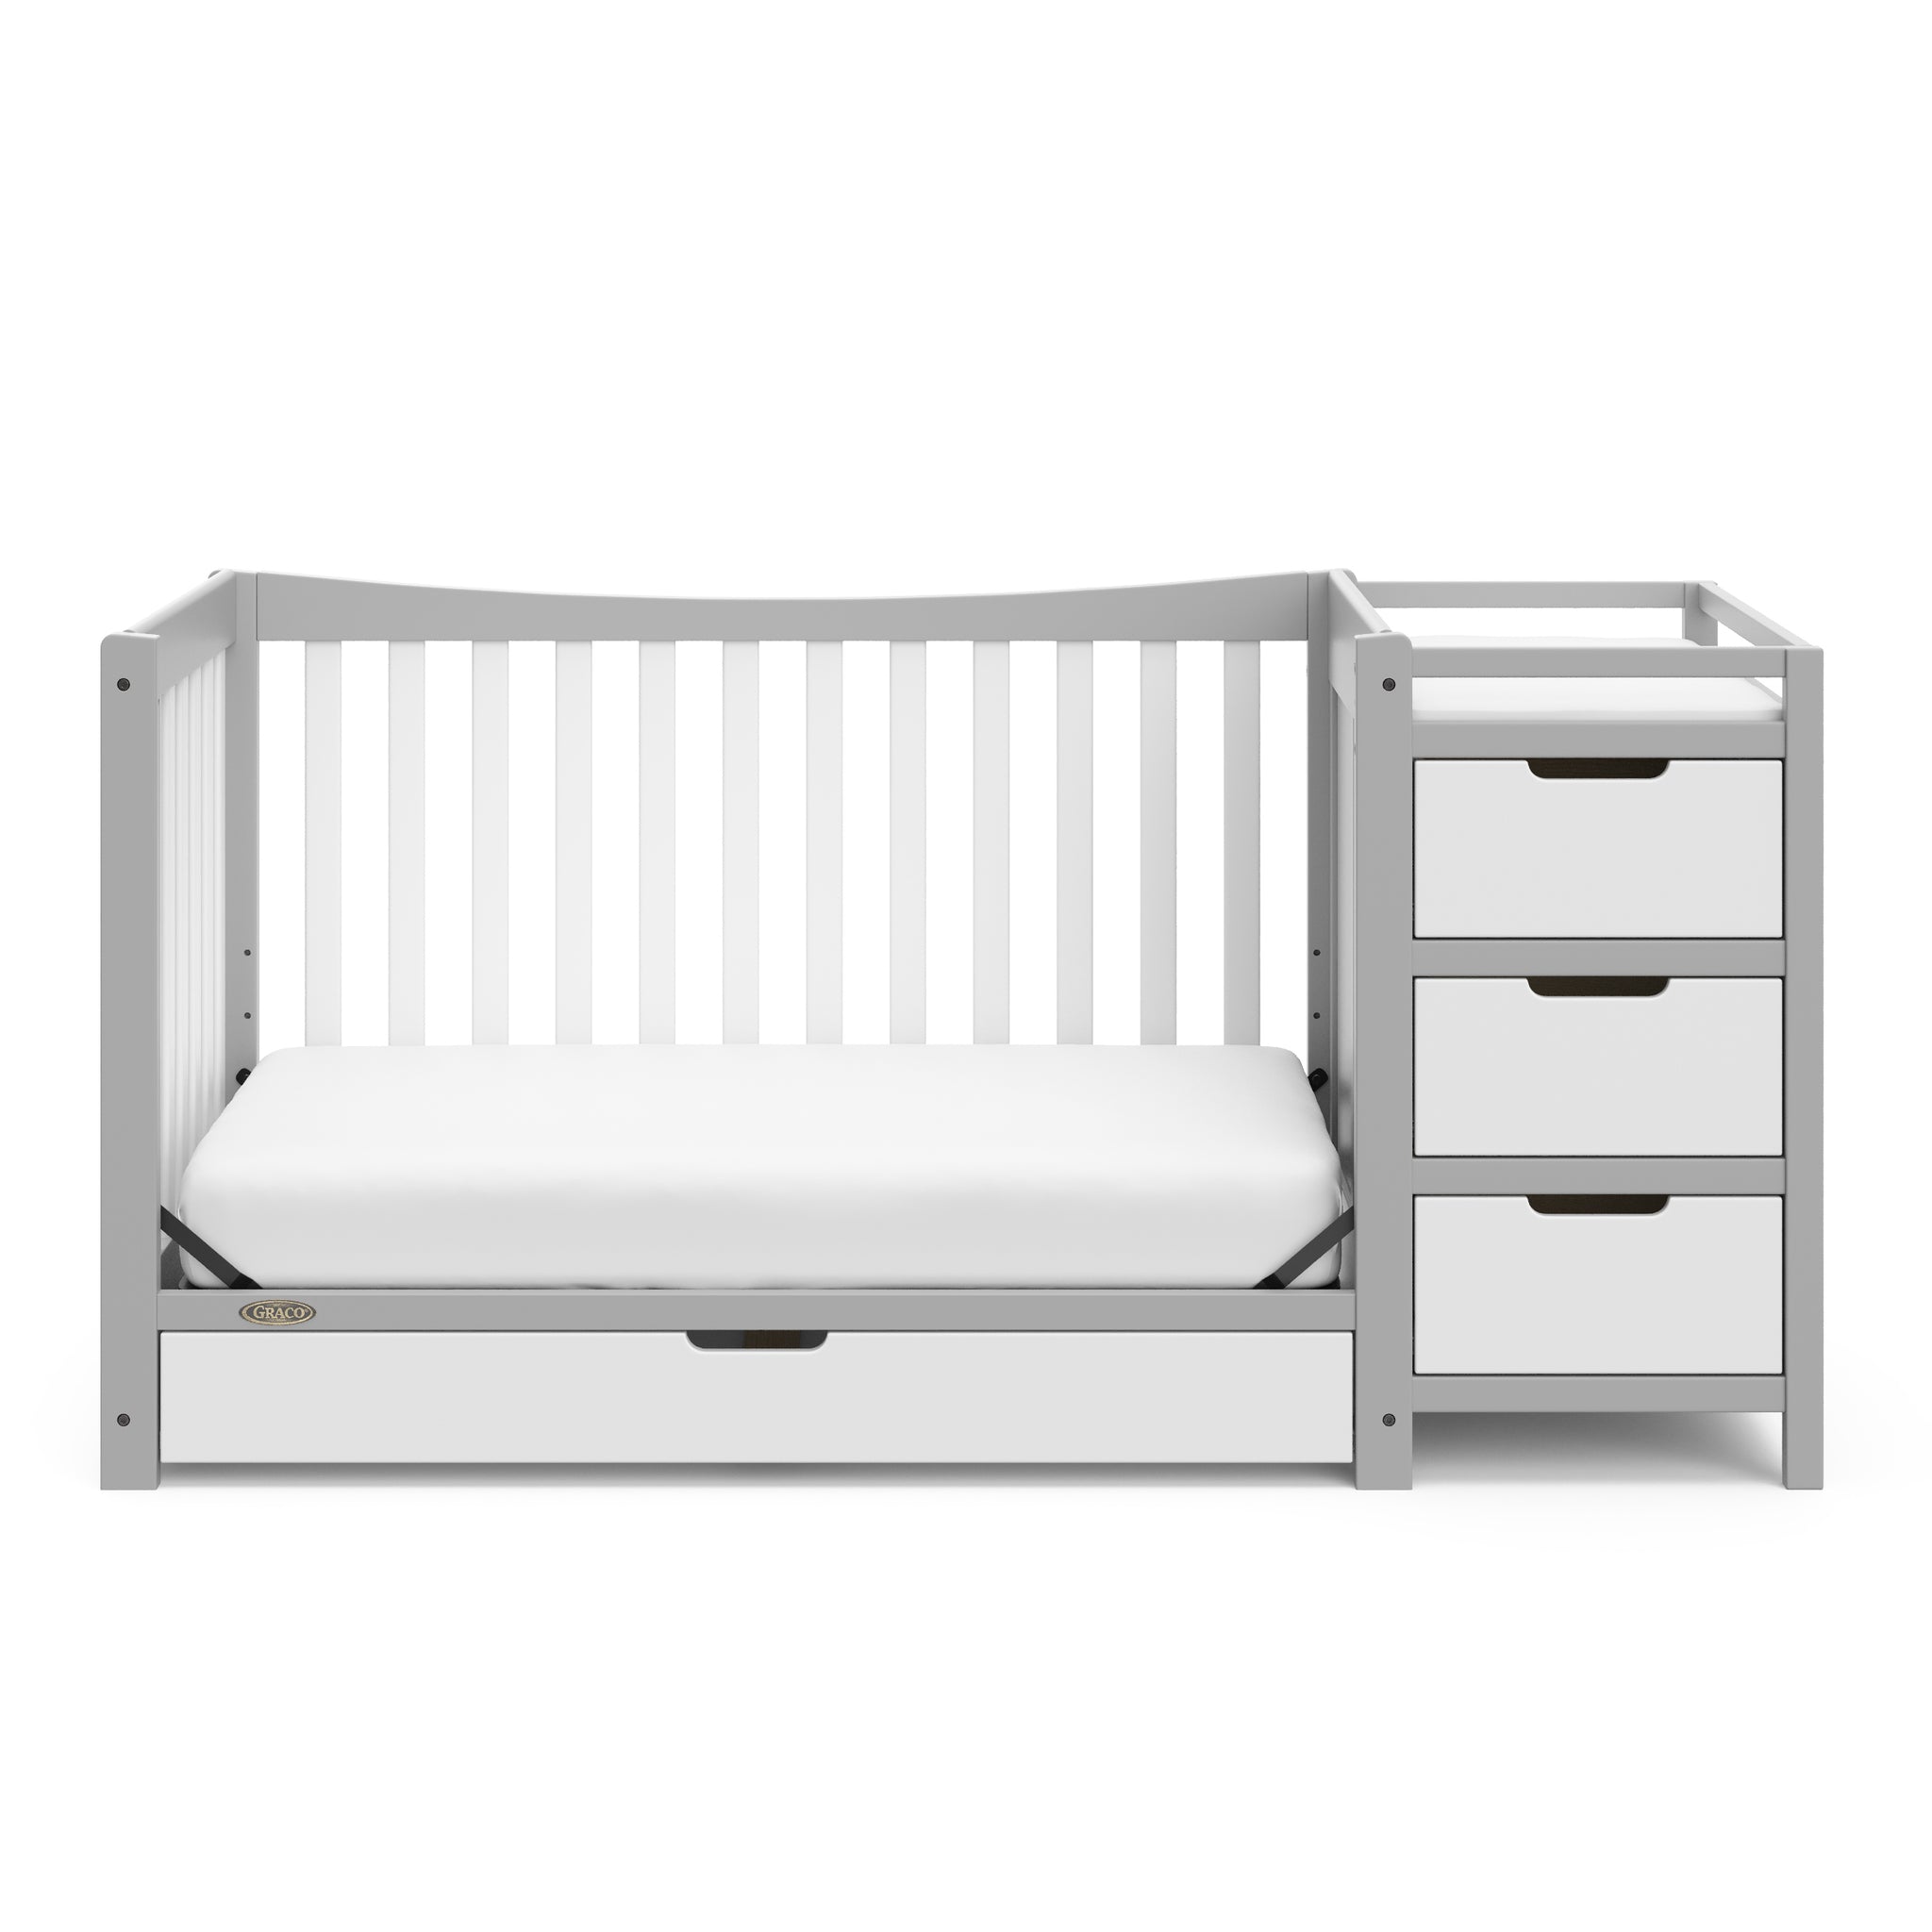 Pebble gray and white crib and changer with drawer in toddler bed conversion 